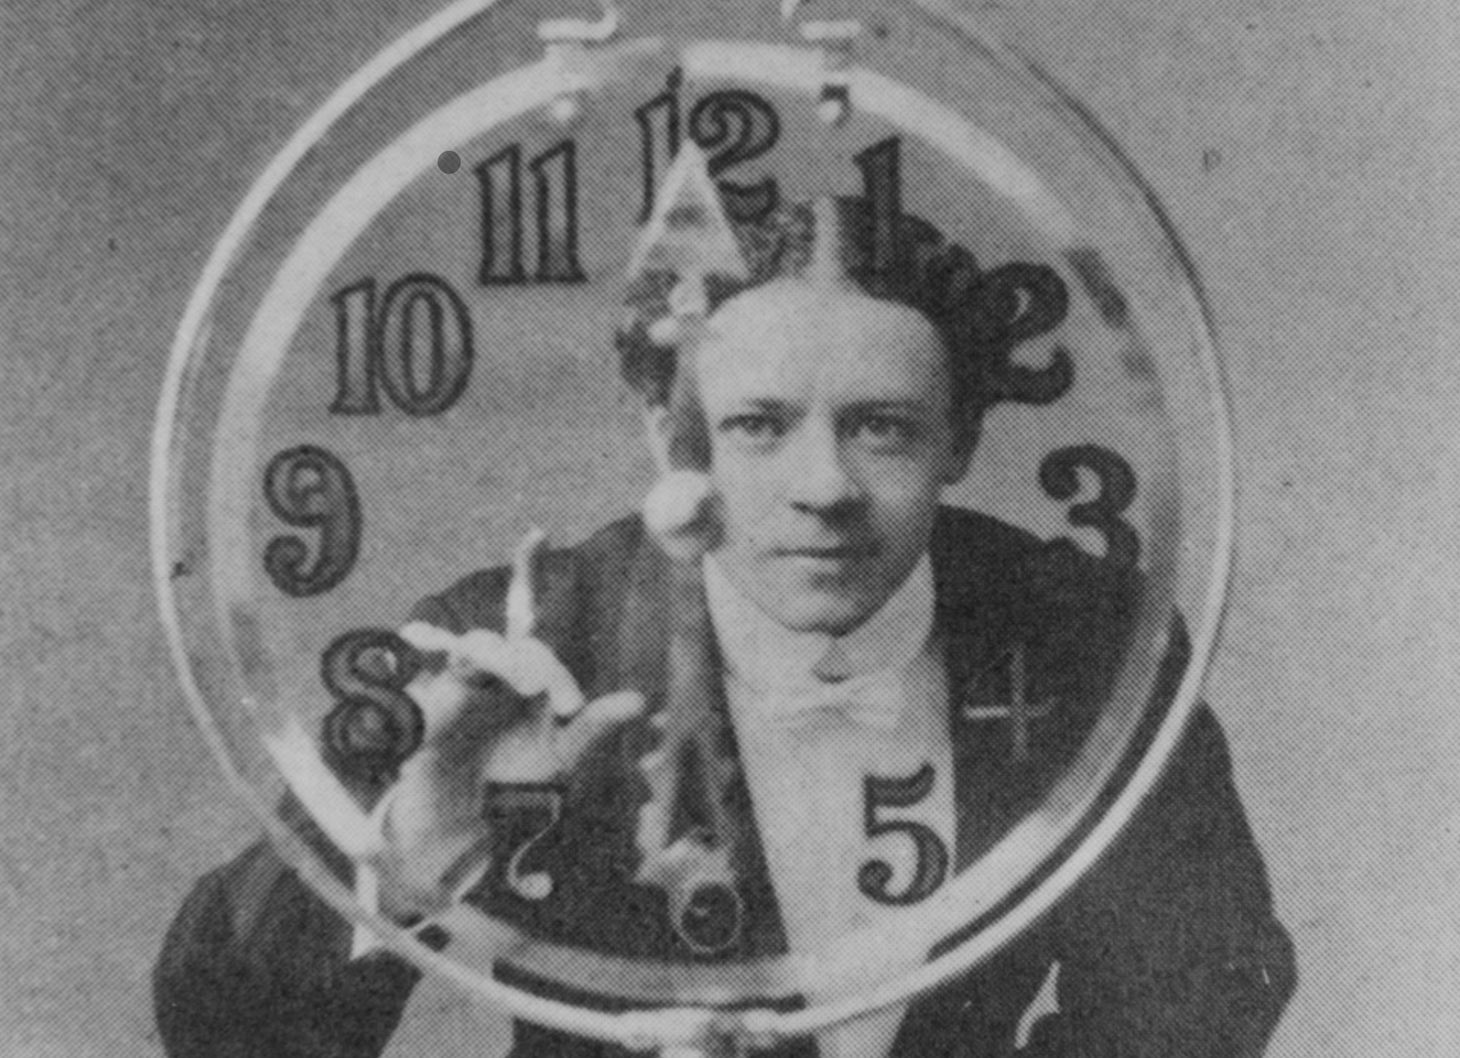 An honestly weird photo of a man with a severe middle-part hairstyle staring at you through a clear-glass clock.